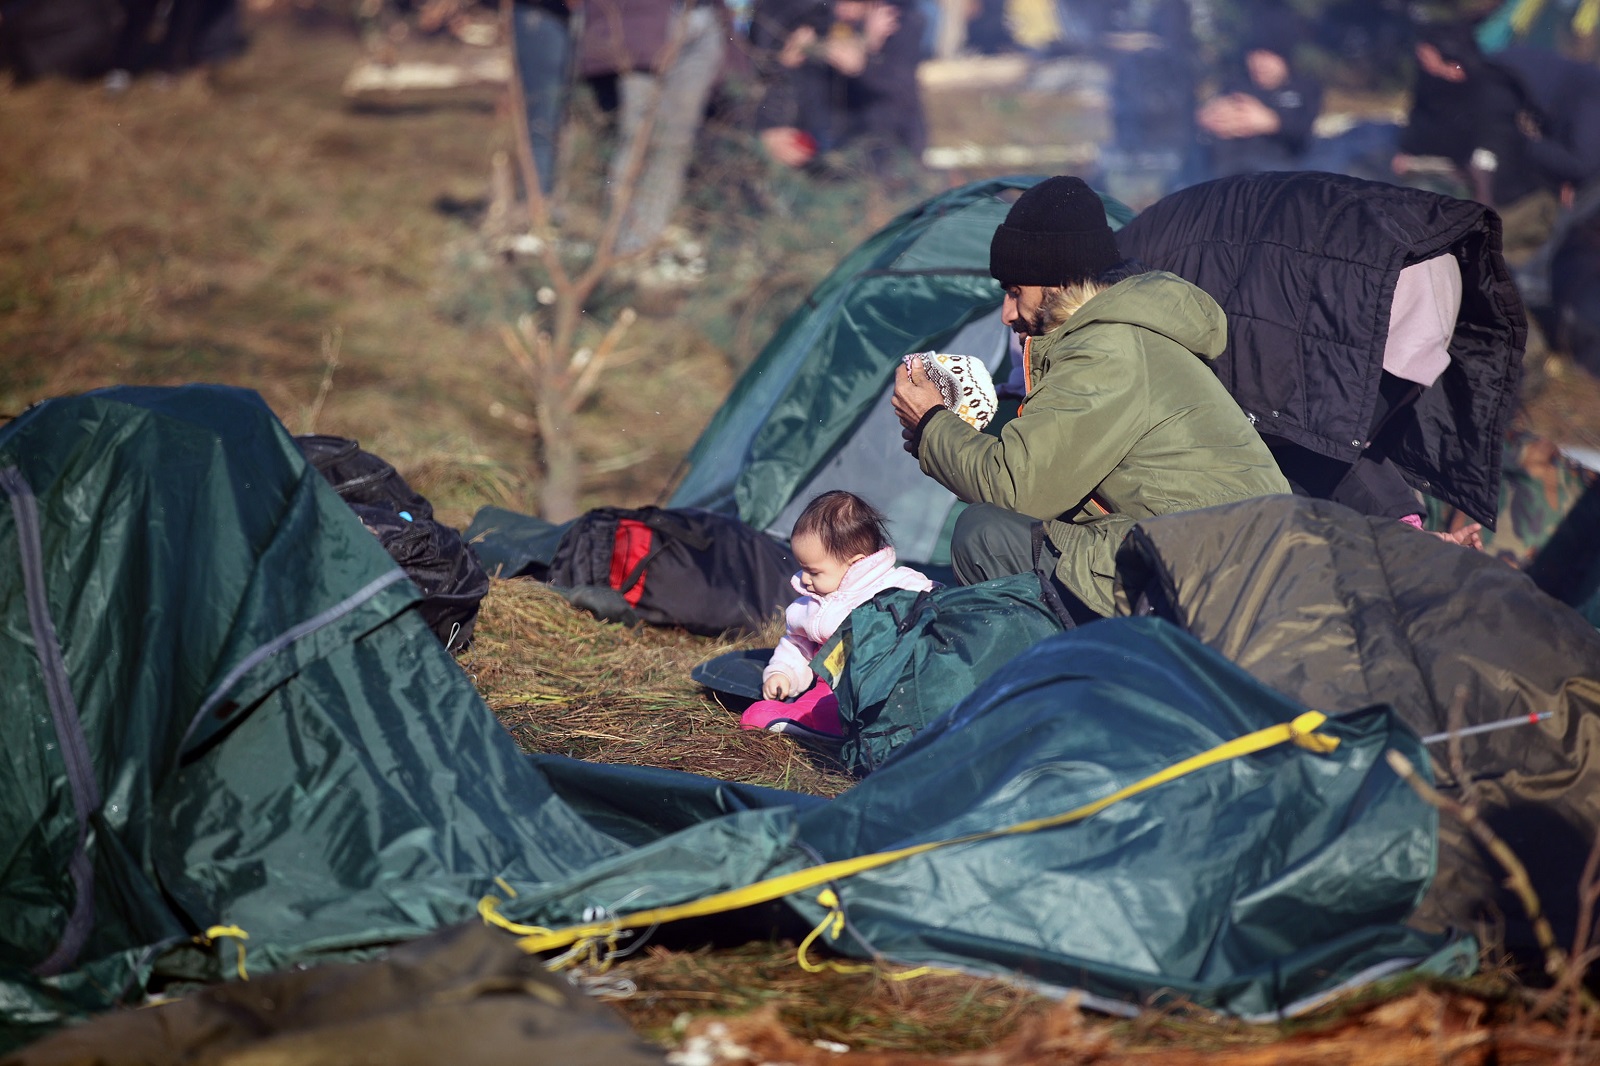 epa09572488 A handout picture made available by Belta news agency shows migrants at their camp near the Belarus-Polish border in the Grodno region, Belarus, 09 November 2021. According to the State Border Committee of Belarus (GPK), there are more than two thousand people near the border, including women and children, who want to obtain asylum in the European Union, 'and they do not consider the territory of the Republic of Belarus as a place of stay.' The territory is guarded by several thousand employees of the Polish special services. The migration crisis at the border of Belarus has been going on since the spring of 2021. Belarusian President Lukashenko said that after the introduction of new EU sanctions against Minsk, the Belarusian authorities will no longer interfere with the movement of illegal migrants to the European Union.  EPA/LEONID SCHEGLOV/BELTA HANDOUT  HANDOUT EDITORIAL USE ONLY/NO SALES